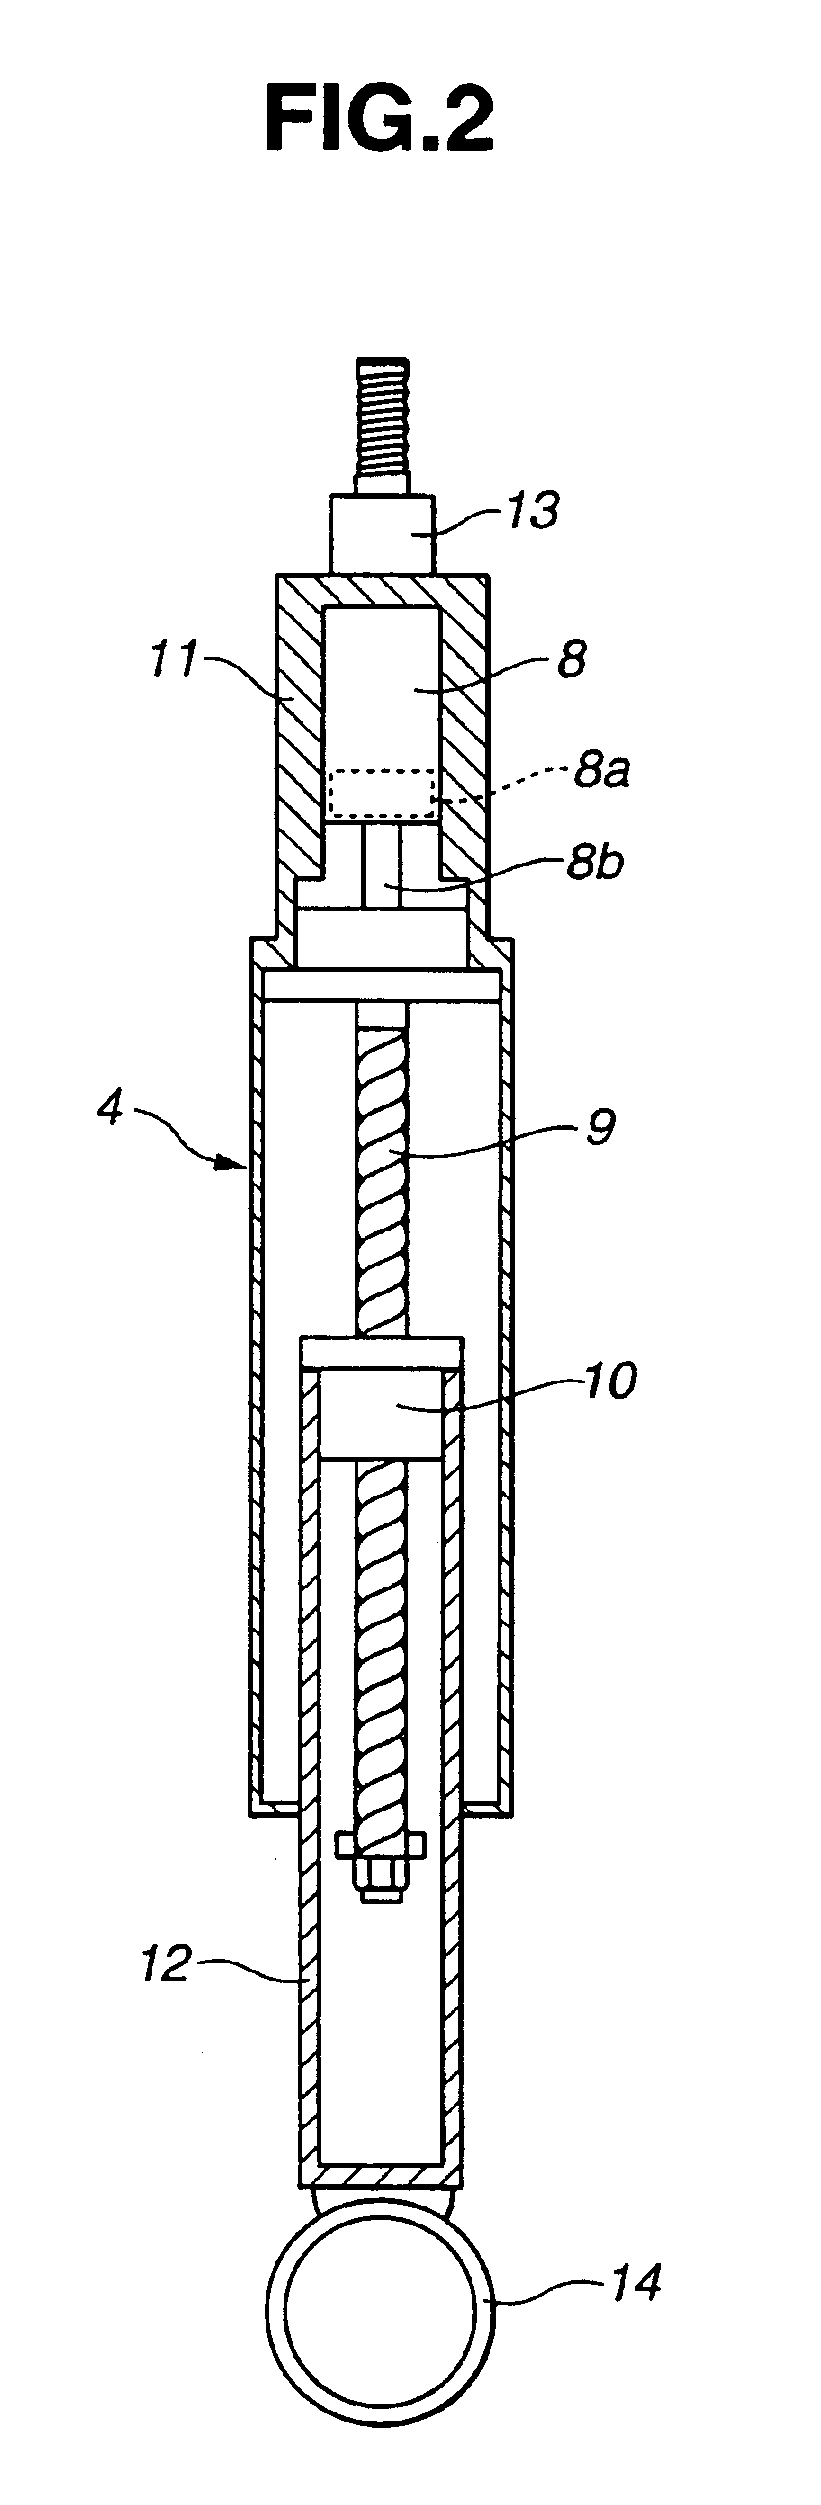 Electromagnetic suspension system for vehicle